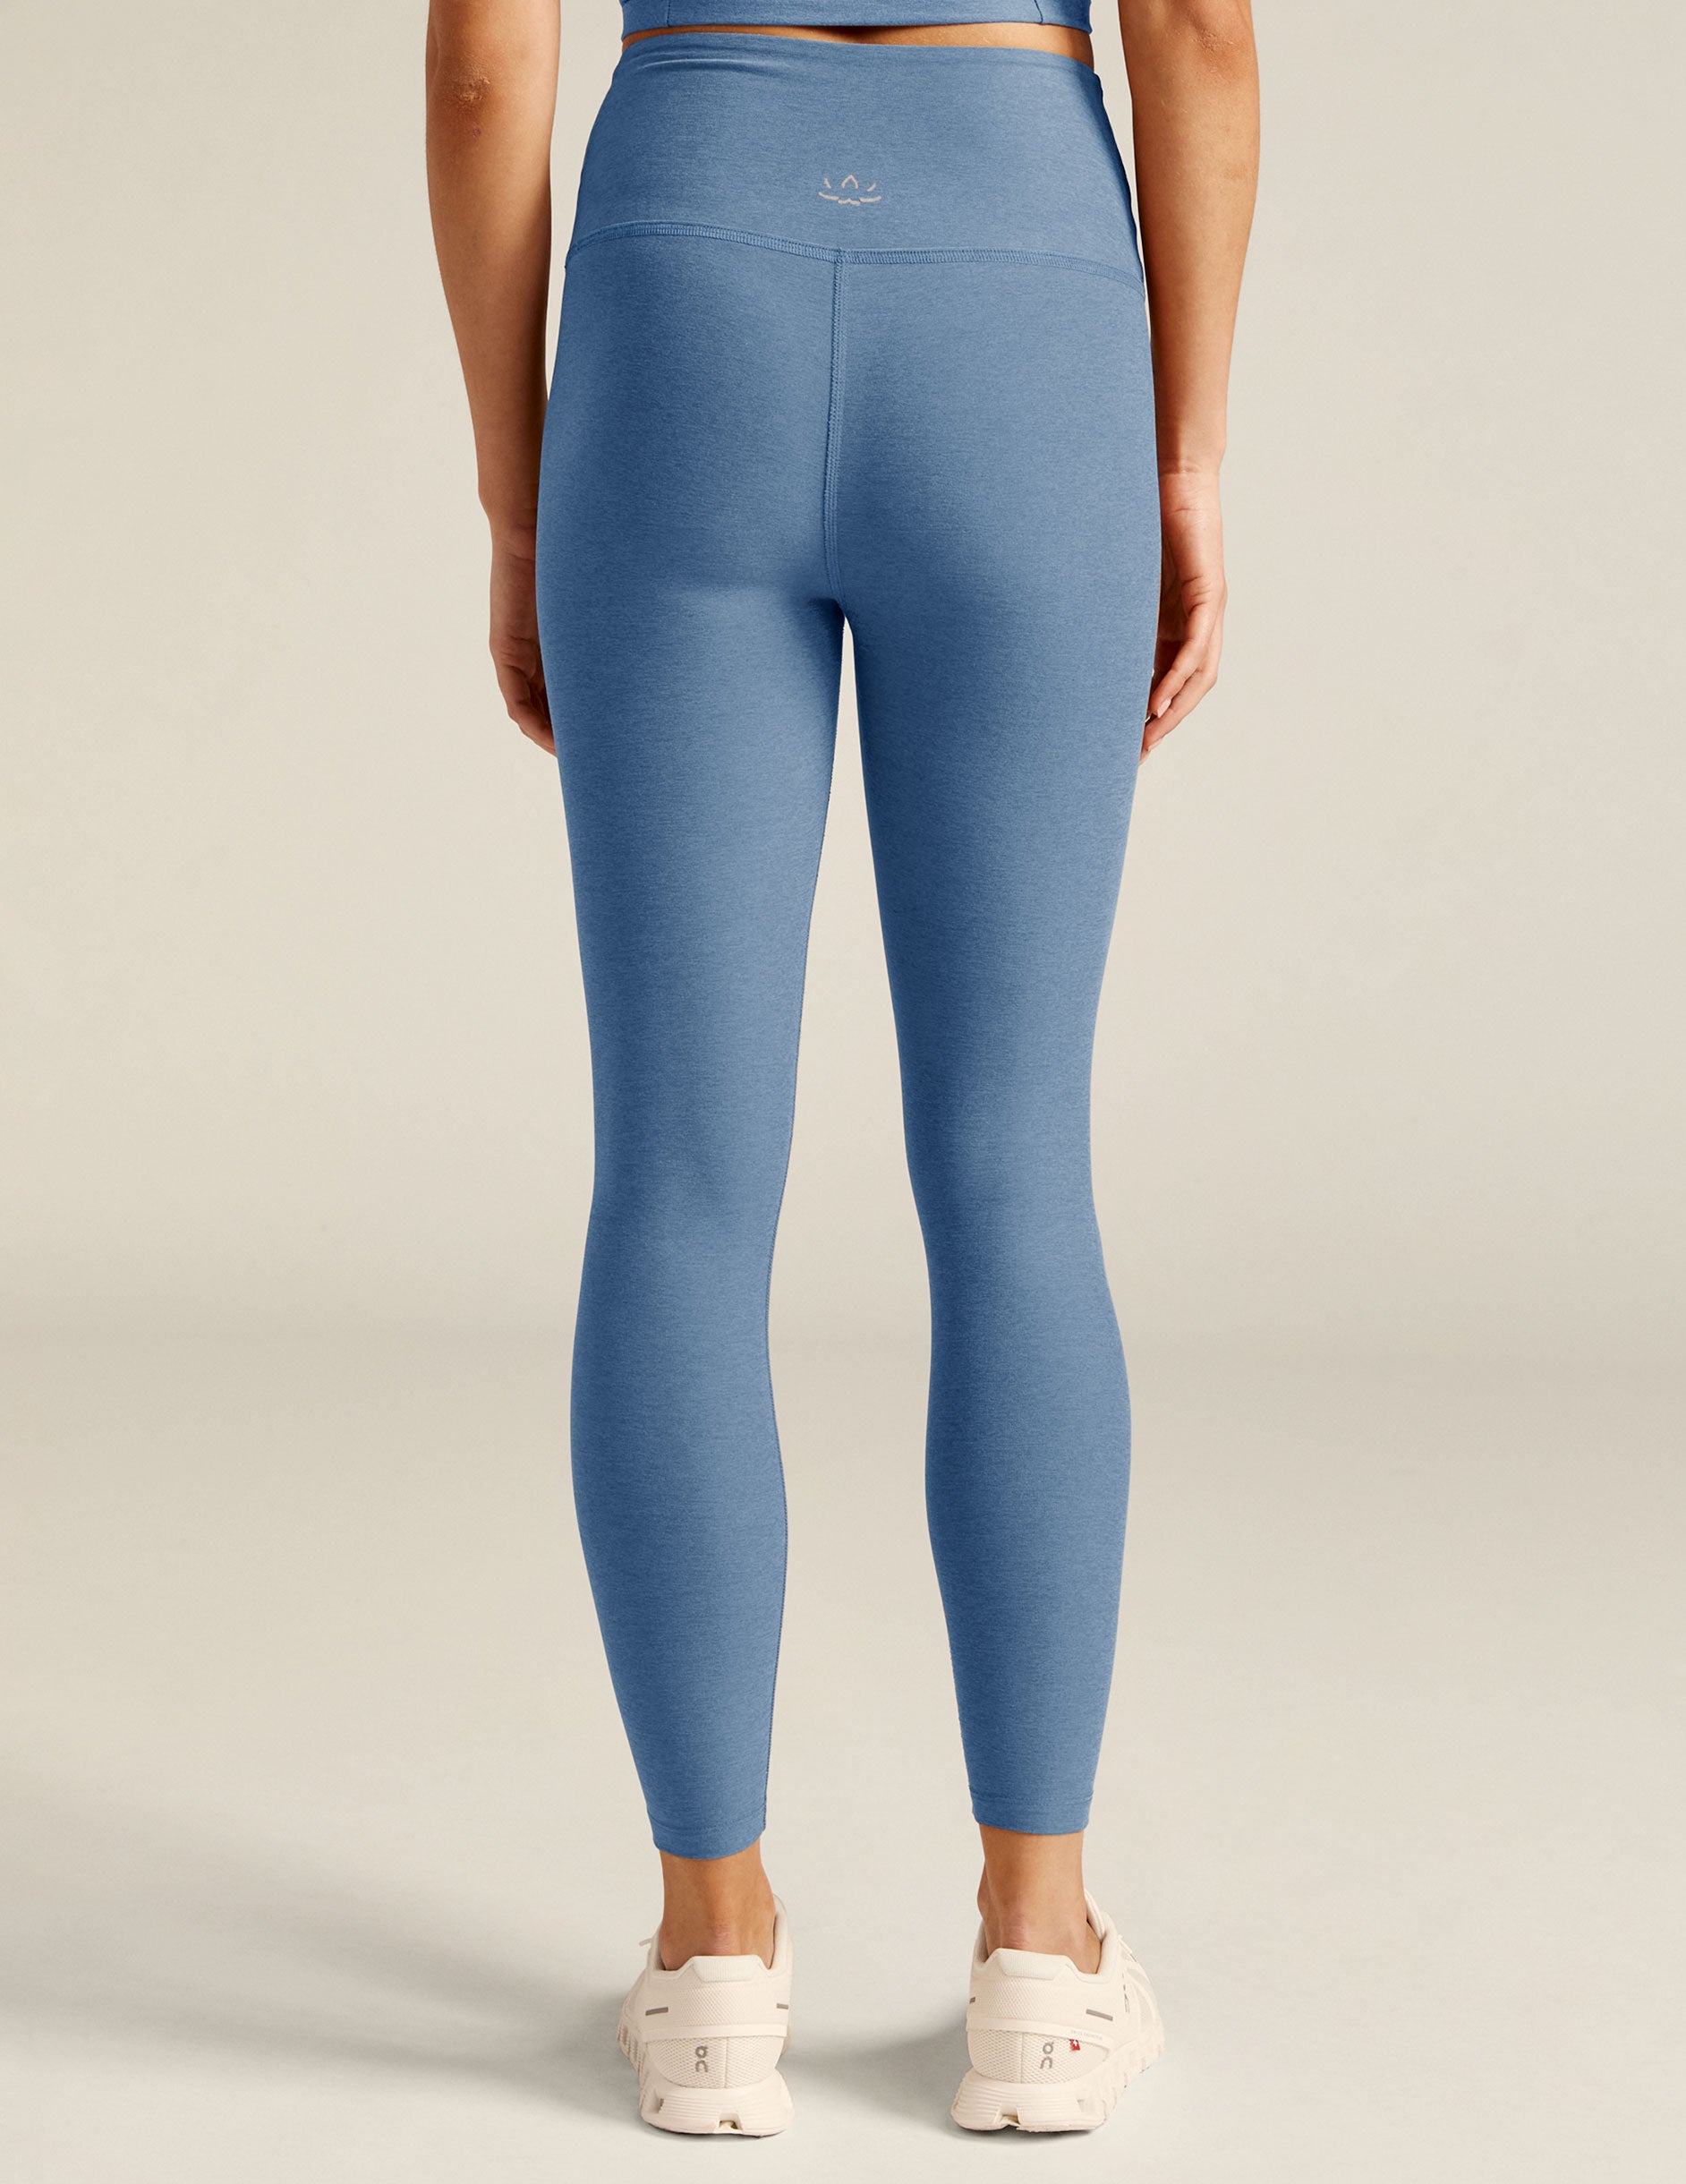 blue high-waisted midi leggings with an overlapping detail on the front waistband. 